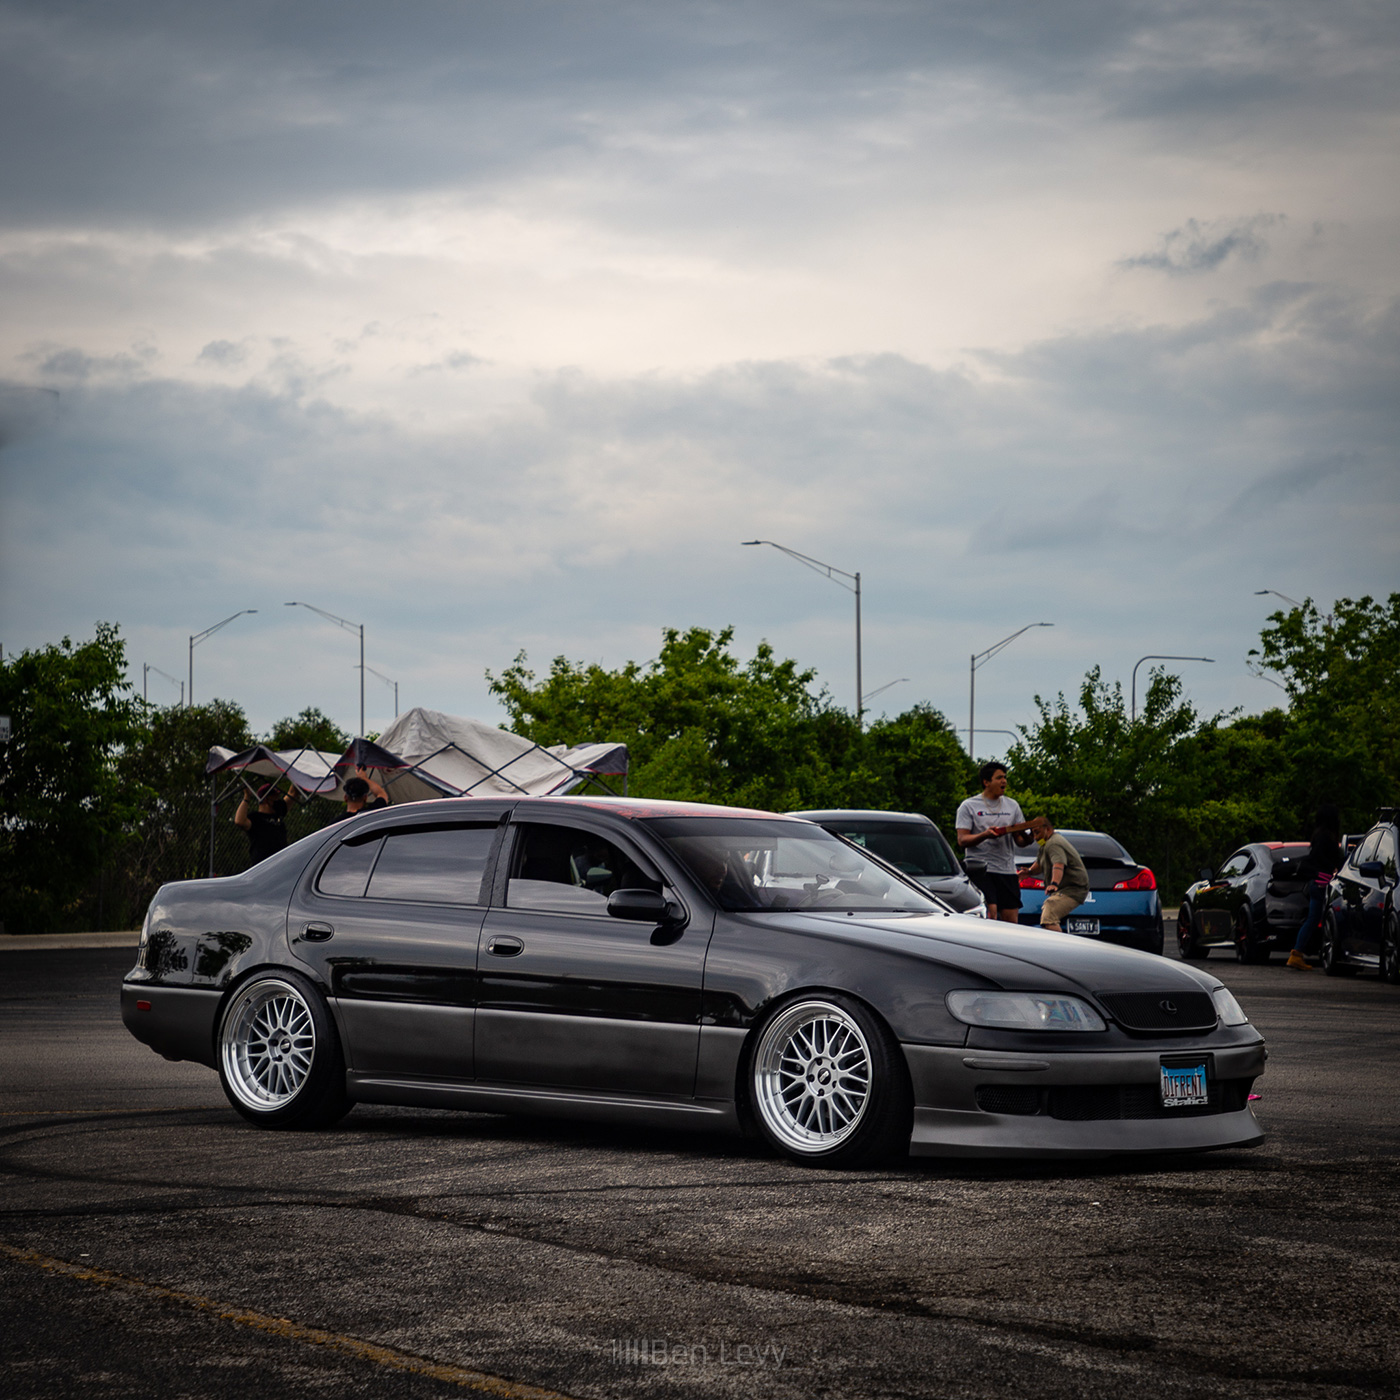 Lowered Lexus GS at Car Show